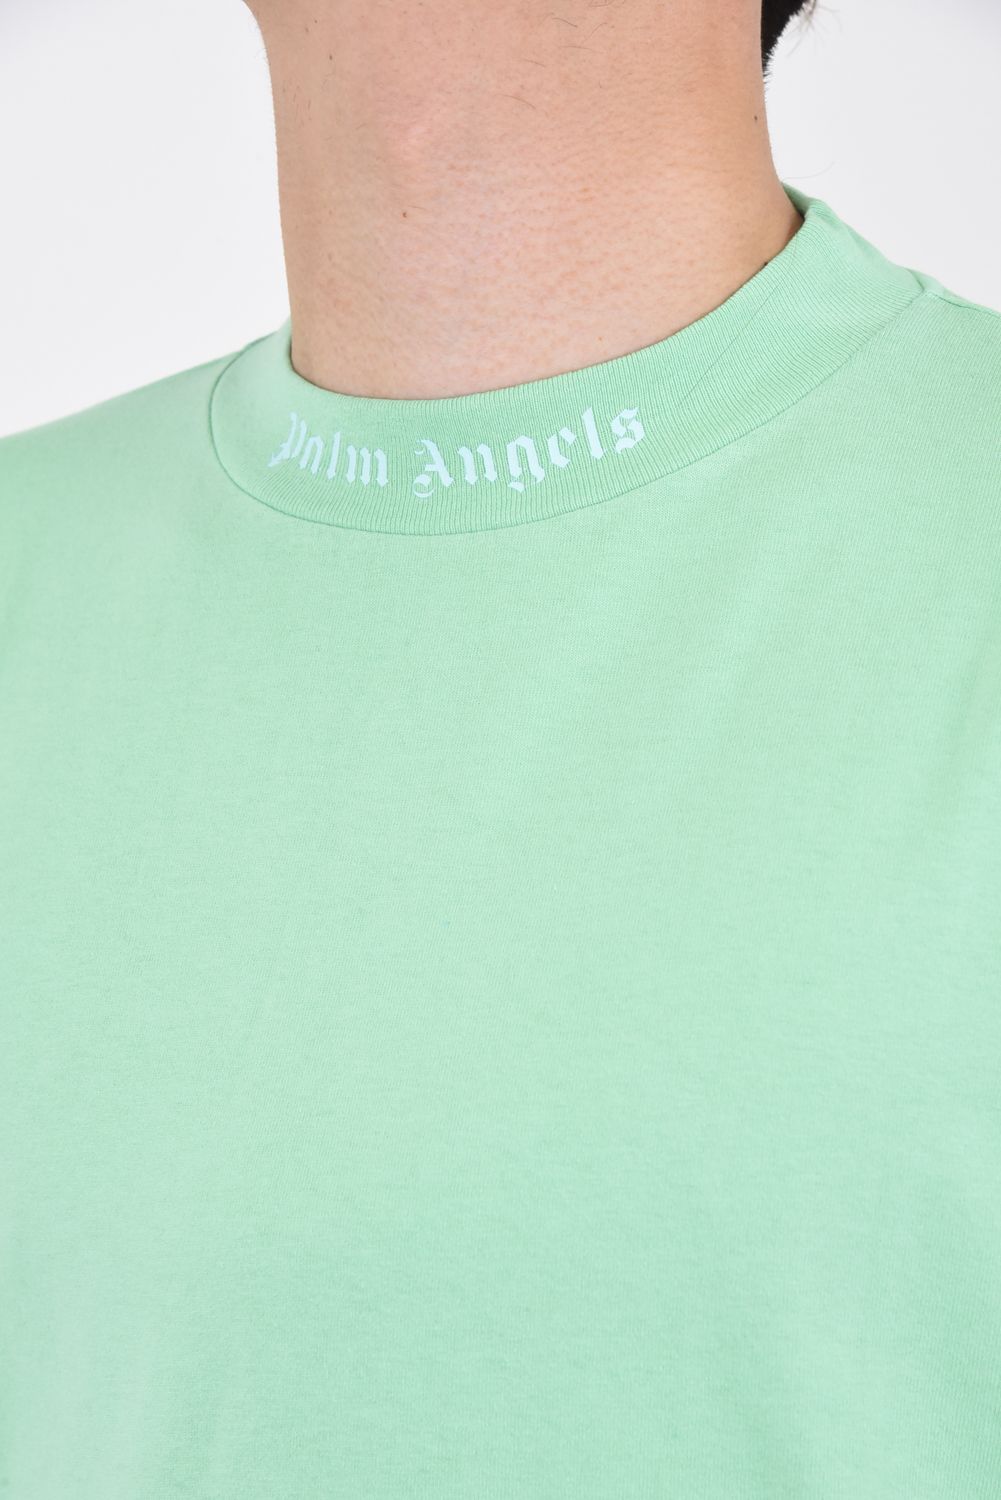 PALM ANGELS - GD CLASSIC LOGO OVER TEE L/S / バックロゴ プリント